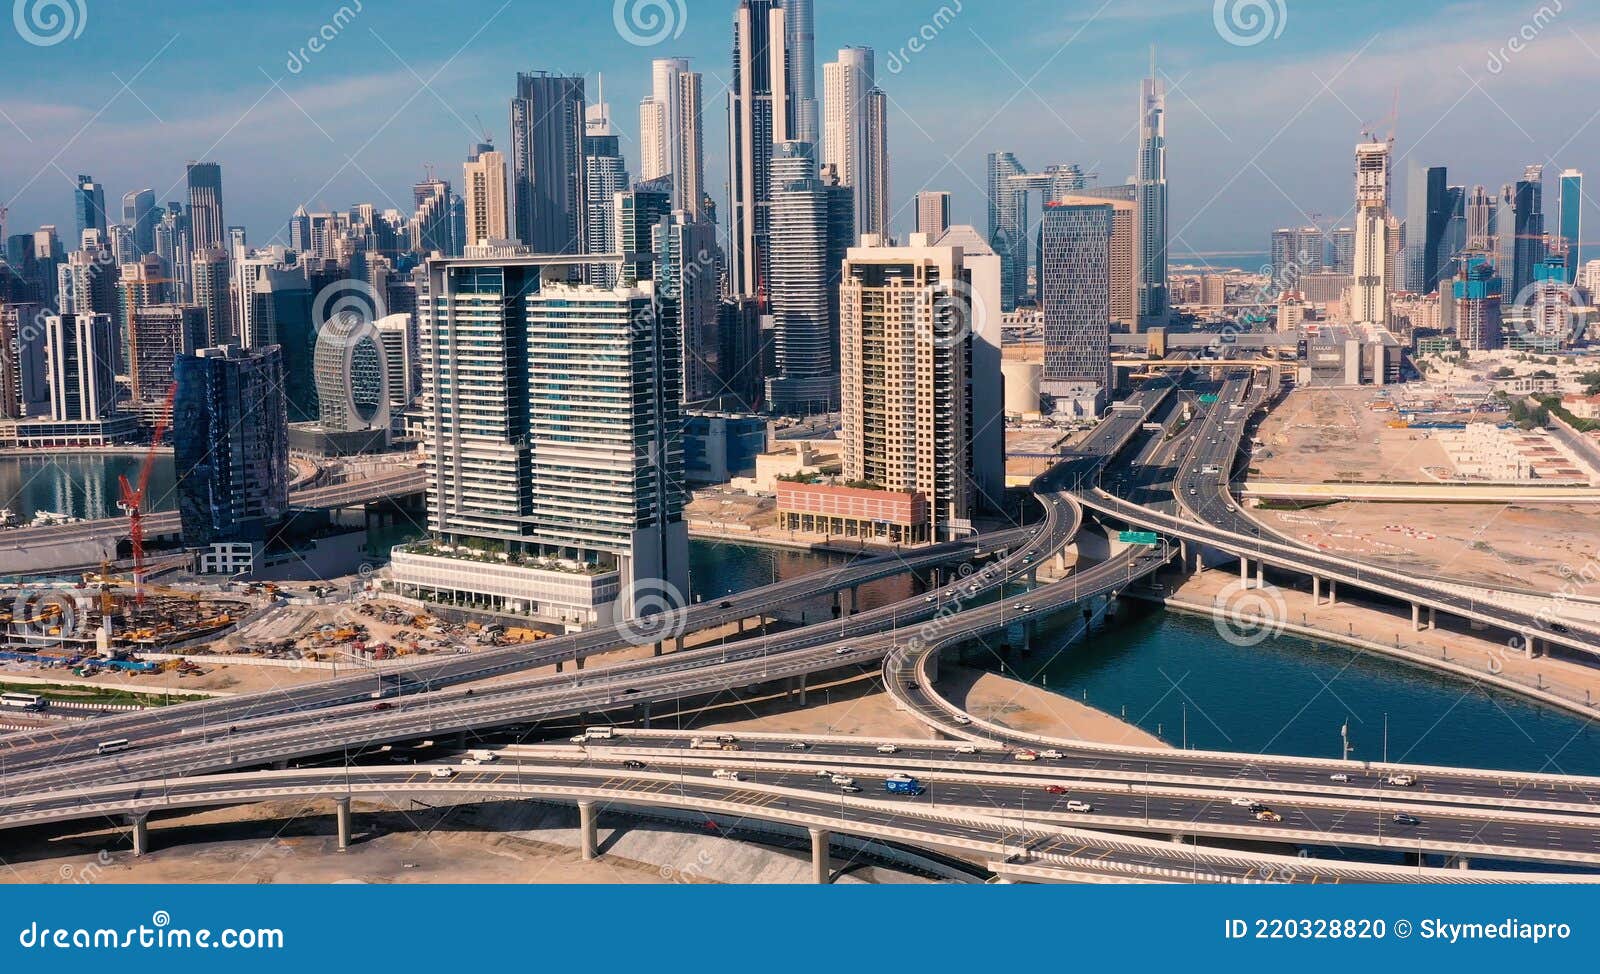 Reduktion Rejse tønde AERIAL. Drone Video of Dubai City at Day Time. Modern City Concept Vith  Transport and River Stock Photo - Image of golden, arabian: 220328820